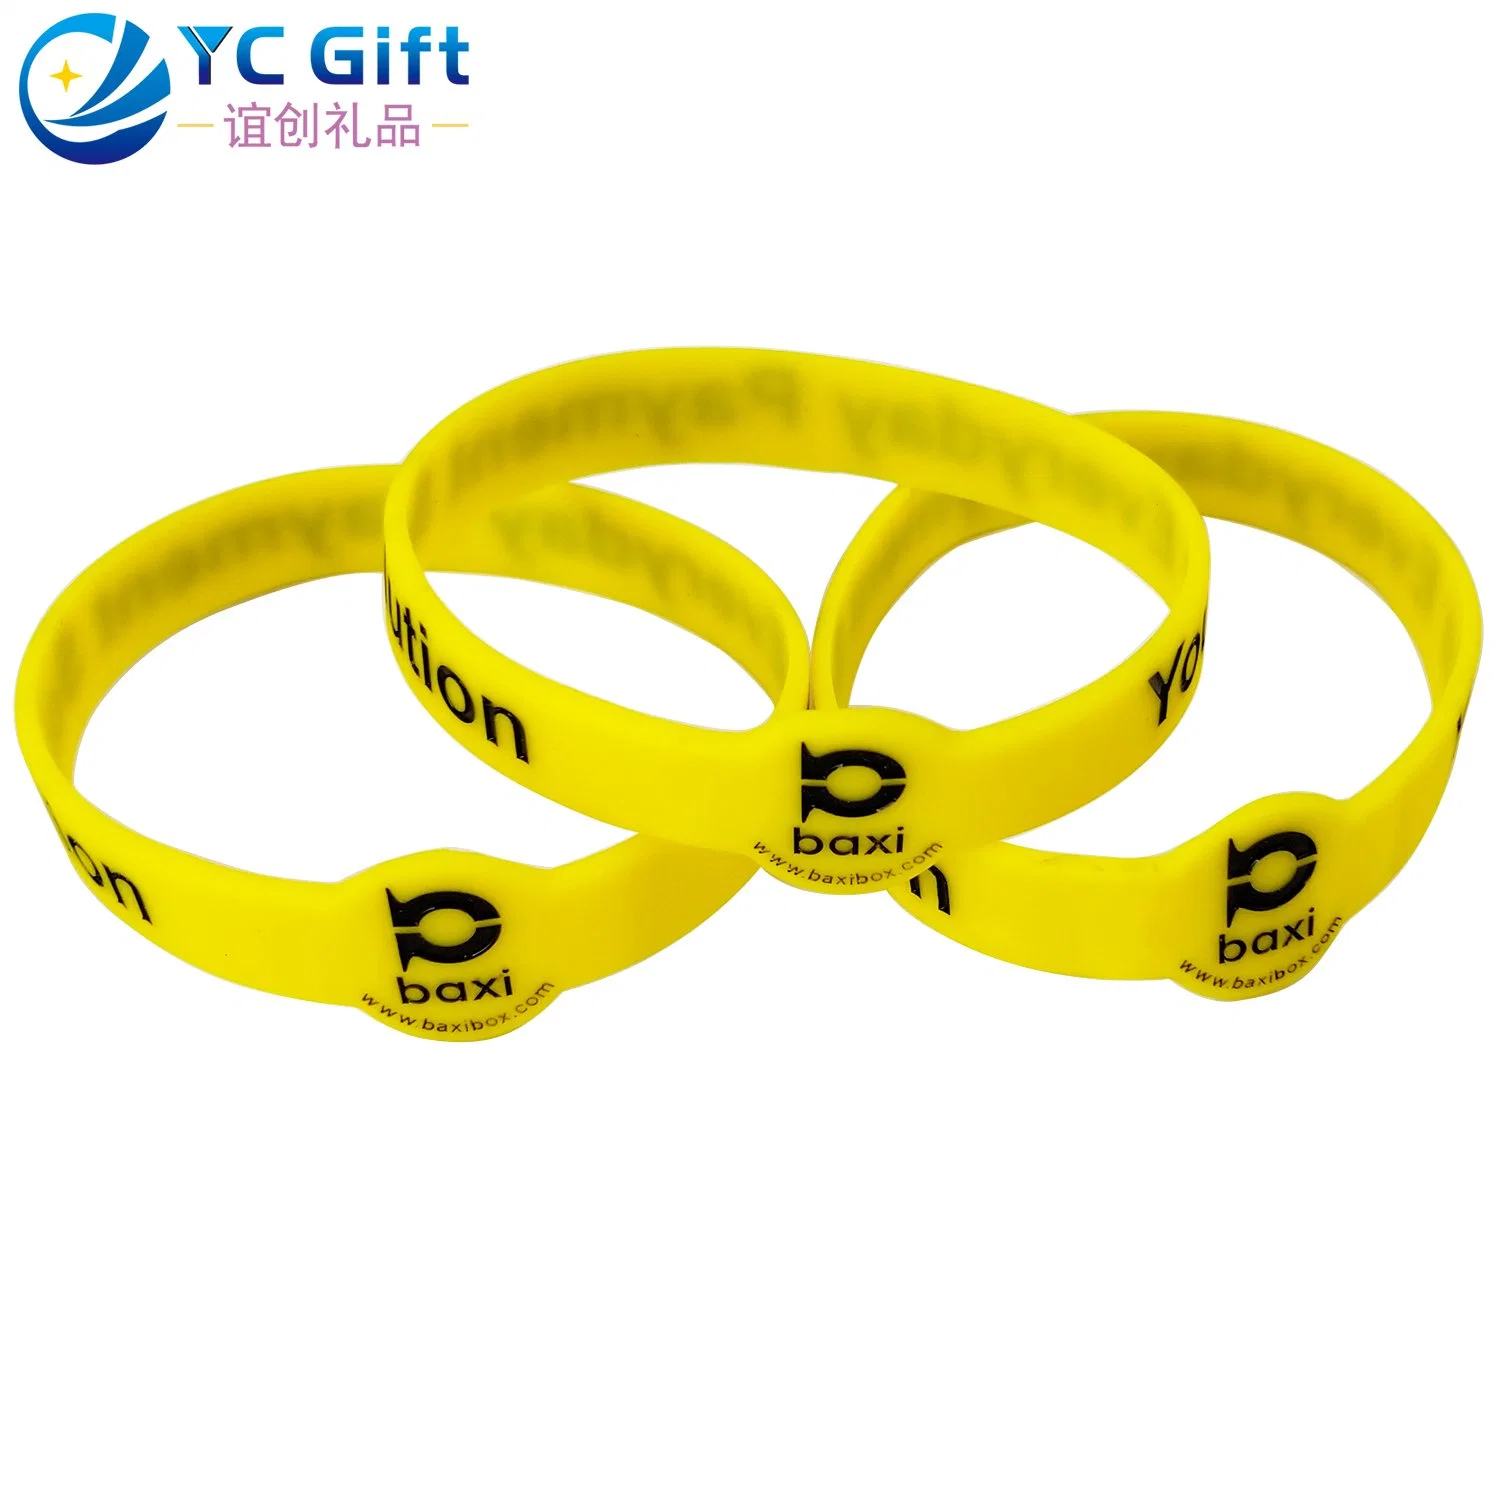 Factory Price Custom Sunken Colorful Silicone Sport Bracelet High quality/High cost performance Marathon Energy Product Rubber Band Kid School Smart Wristband for Promotional Gift